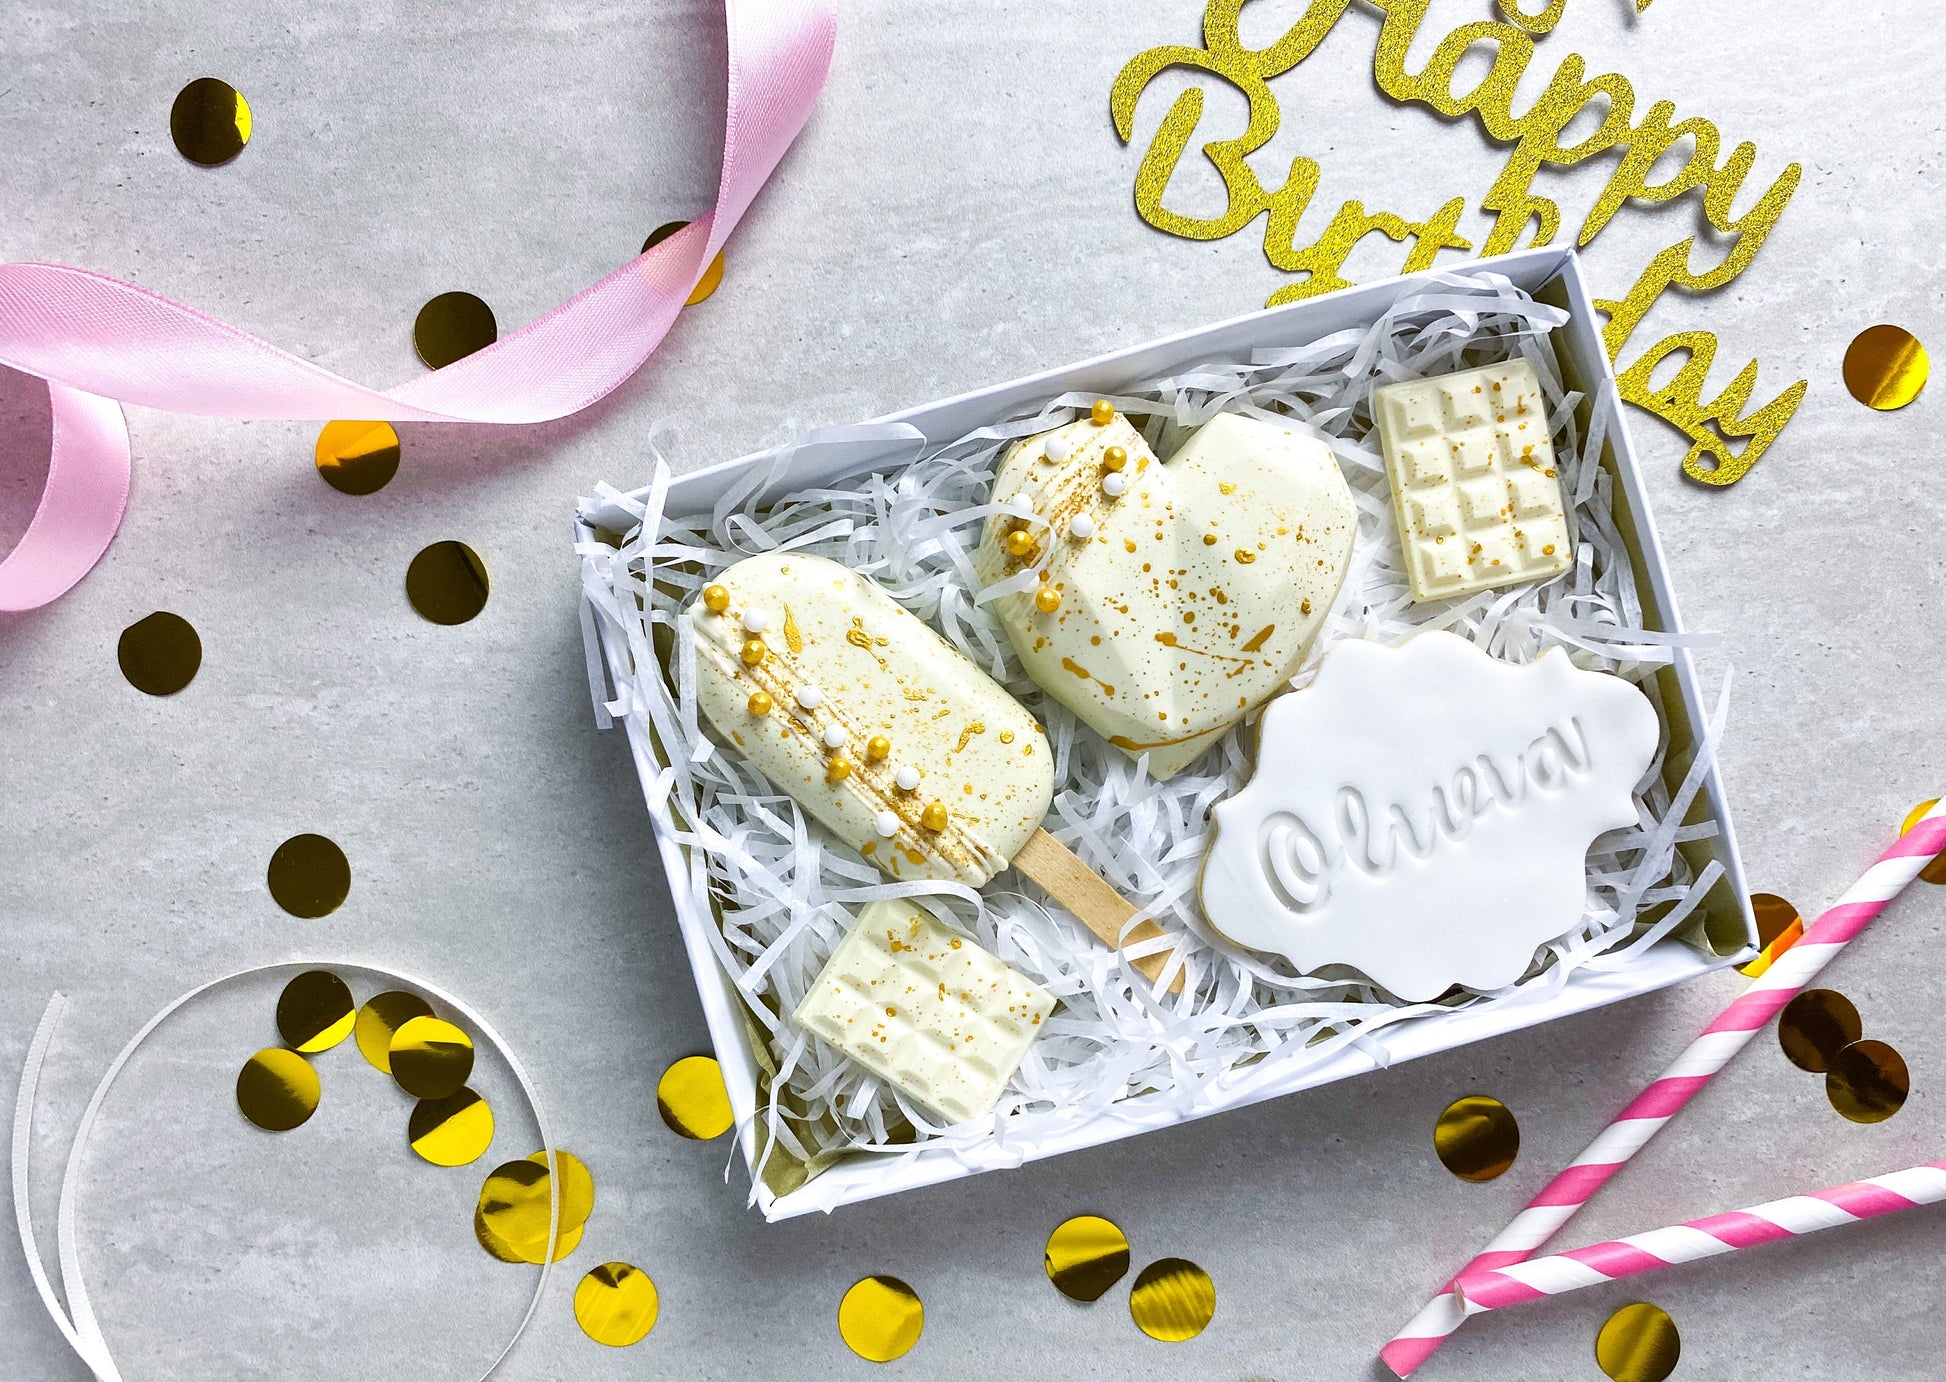 Schmancy - Happiness isopening a fancy cakesicle box and eating the  cakesicle too! Agree folks? Choose from a wide range of cakesicles boxes  from -   . . . . . #caksicle #